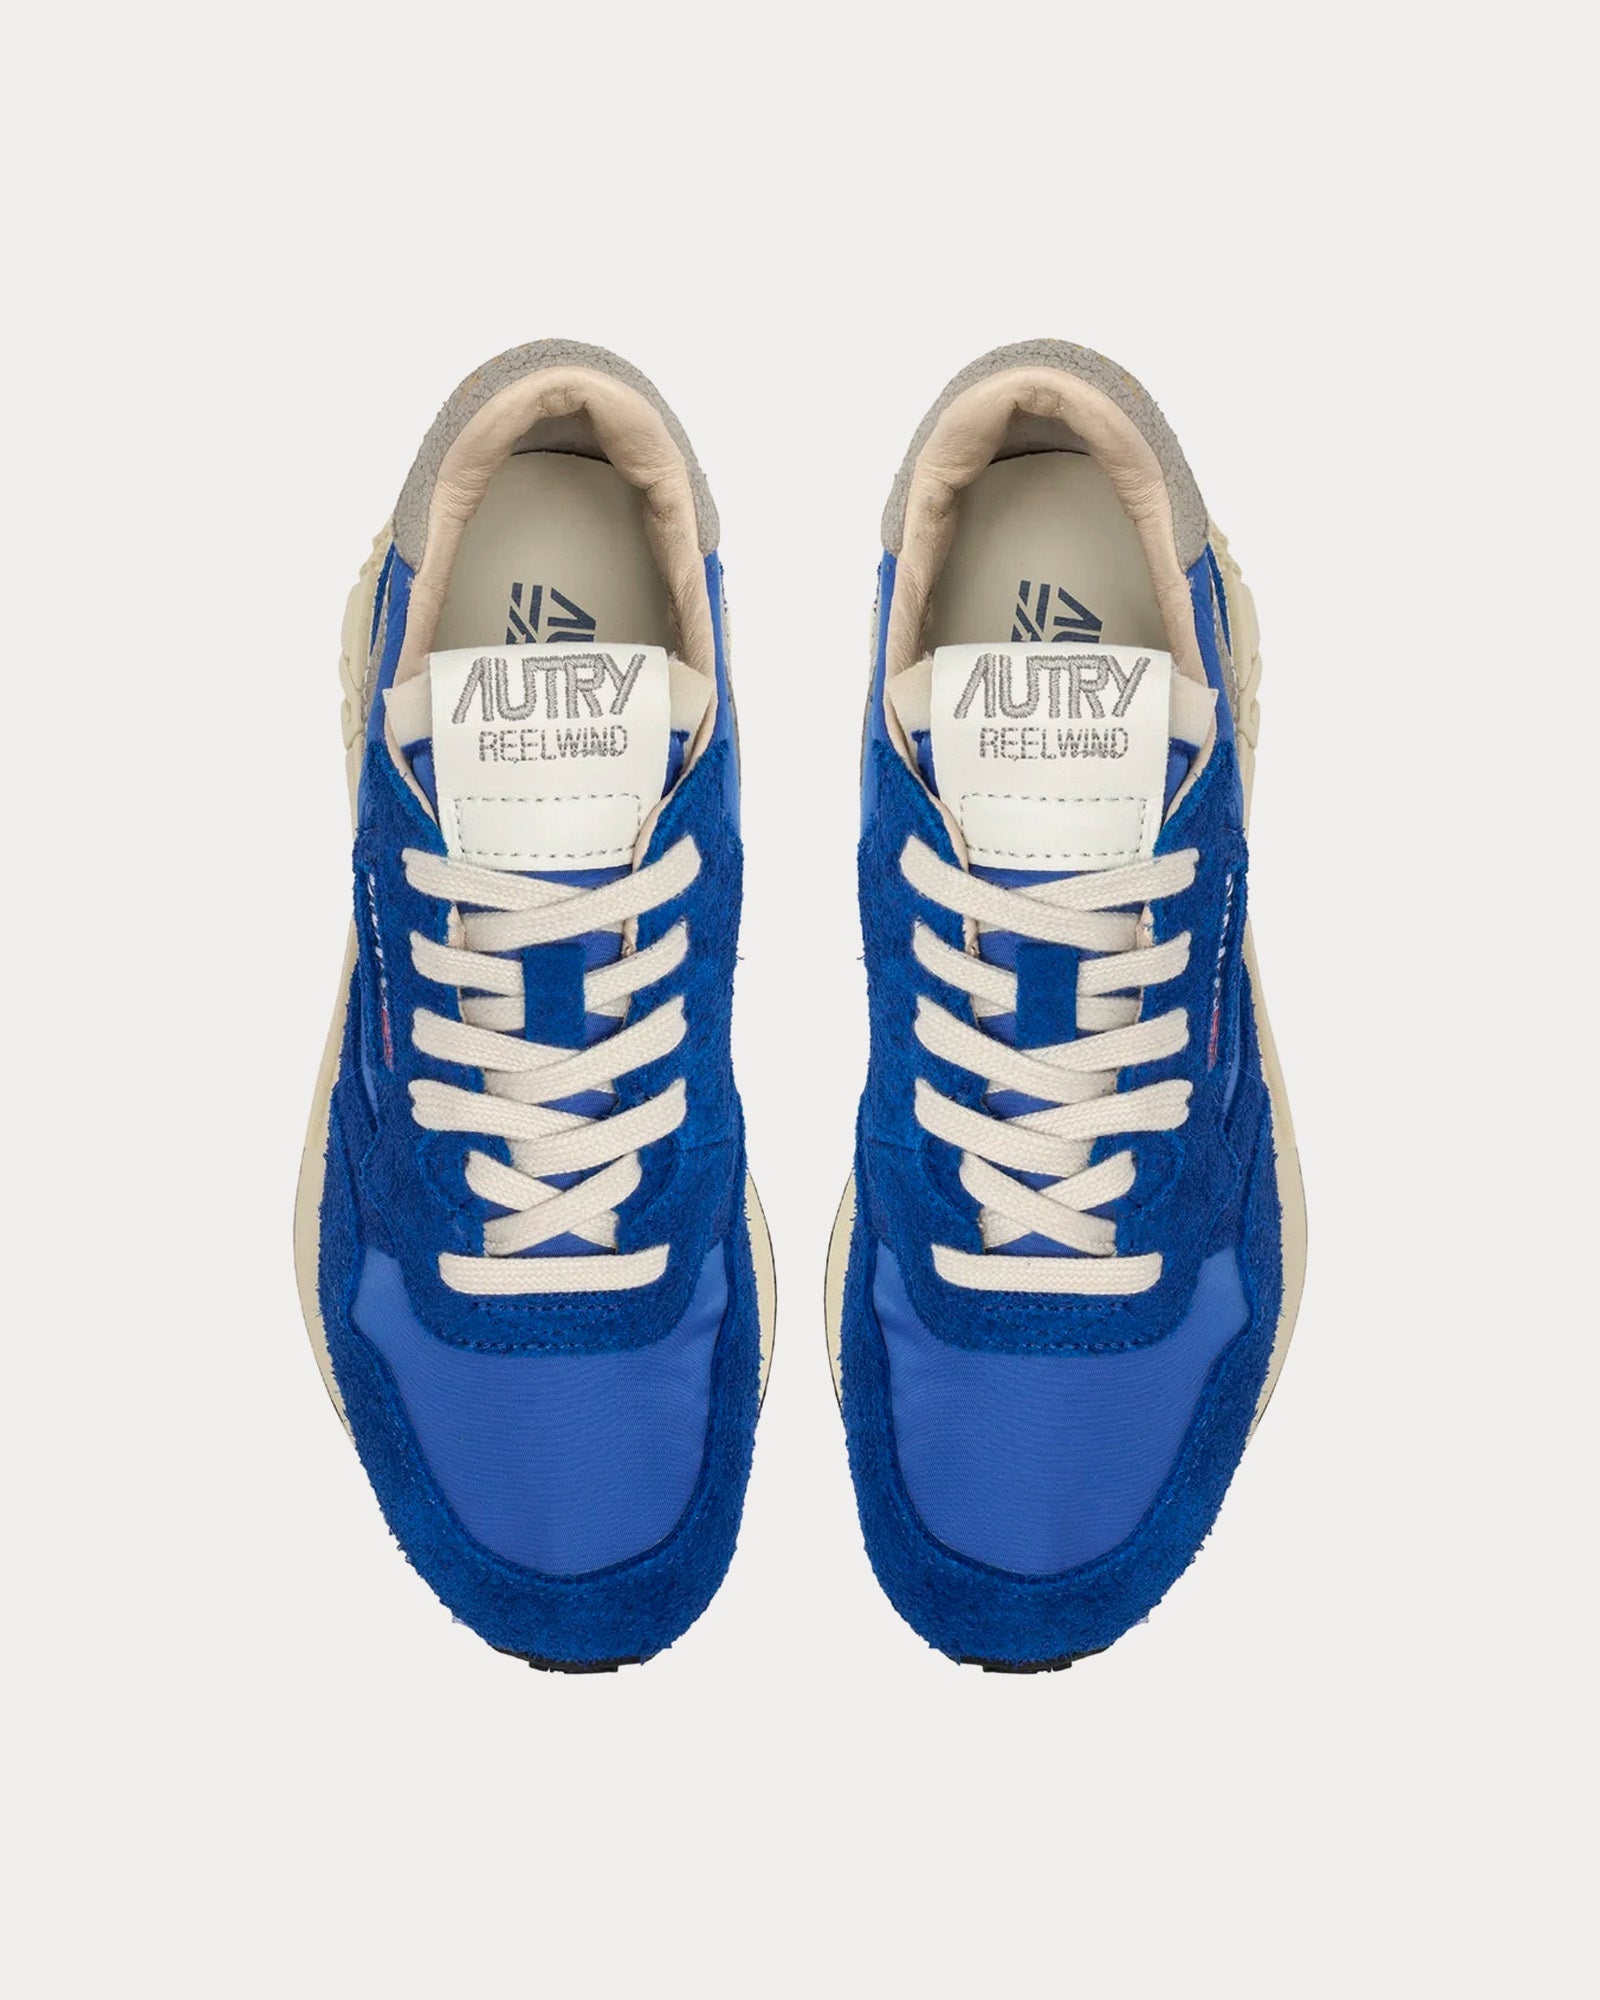 Autry - Reelwind Nylon & Suede Electric Blue Low Top Sneakers